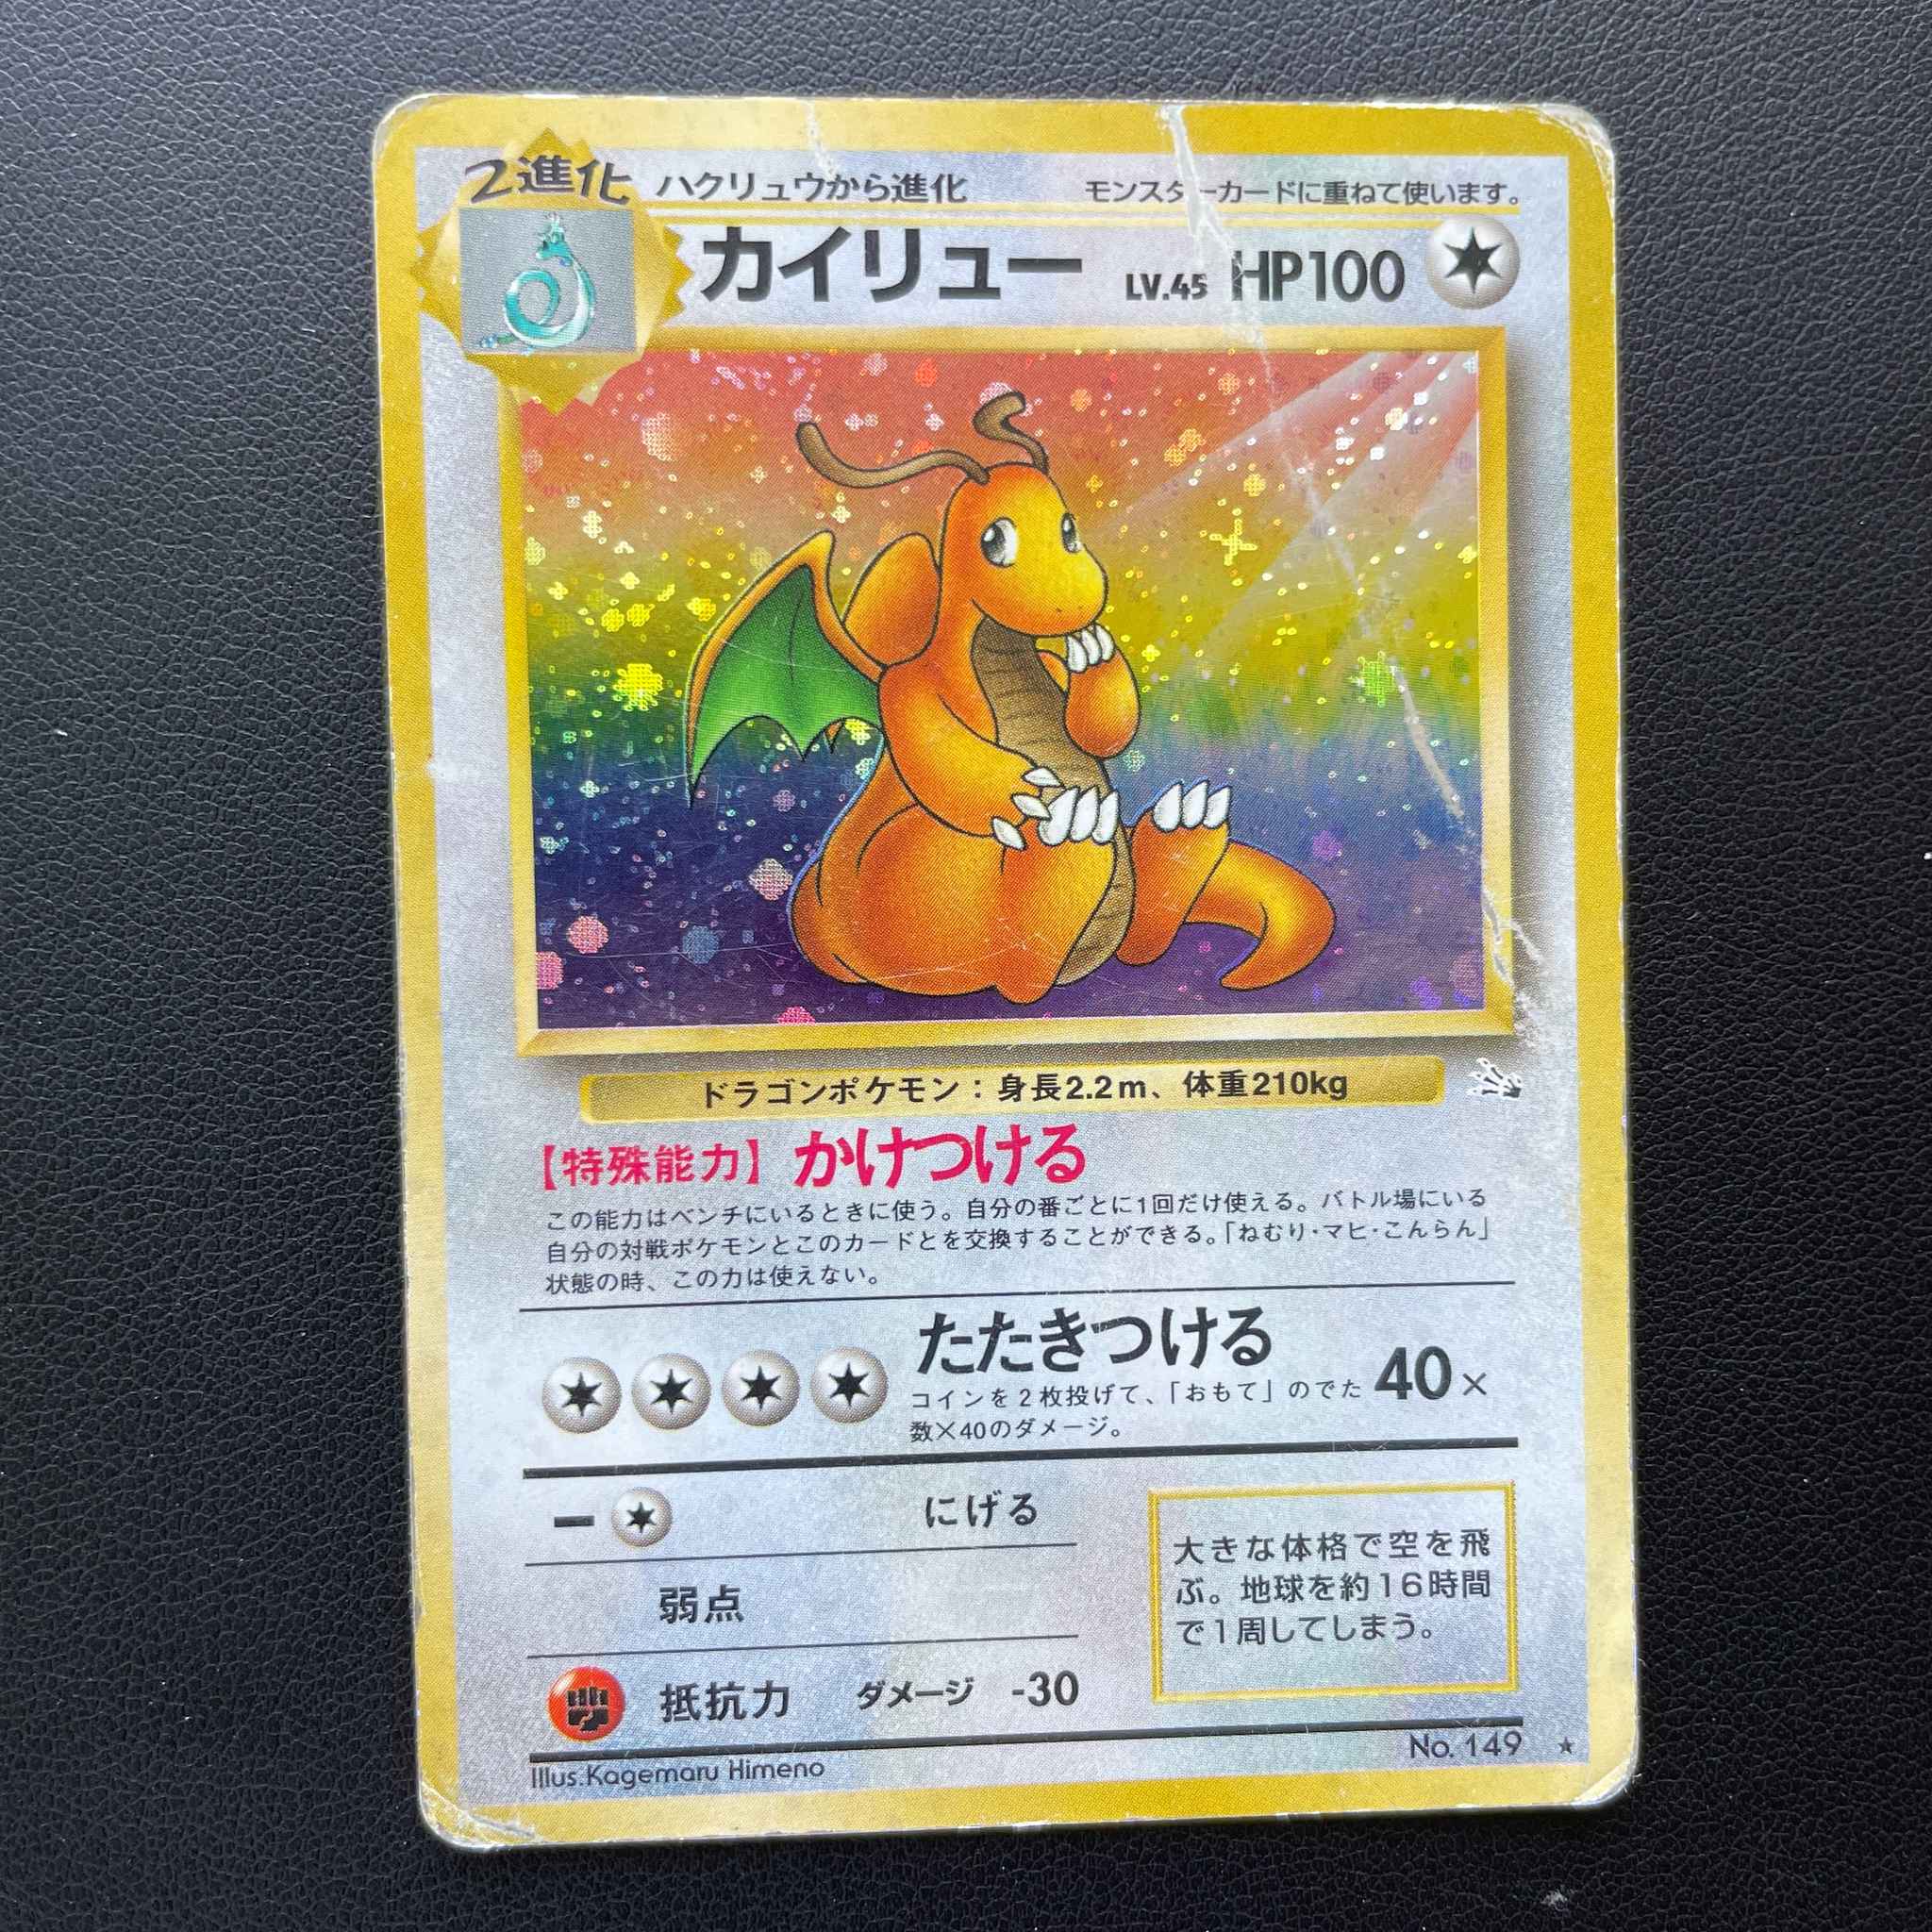 Japanese Dragonite Fossil Stock Image Dragonite 4 Fossil Pokemon Online Gaming Store For Cards Miniatures Singles Packs Booster Boxes